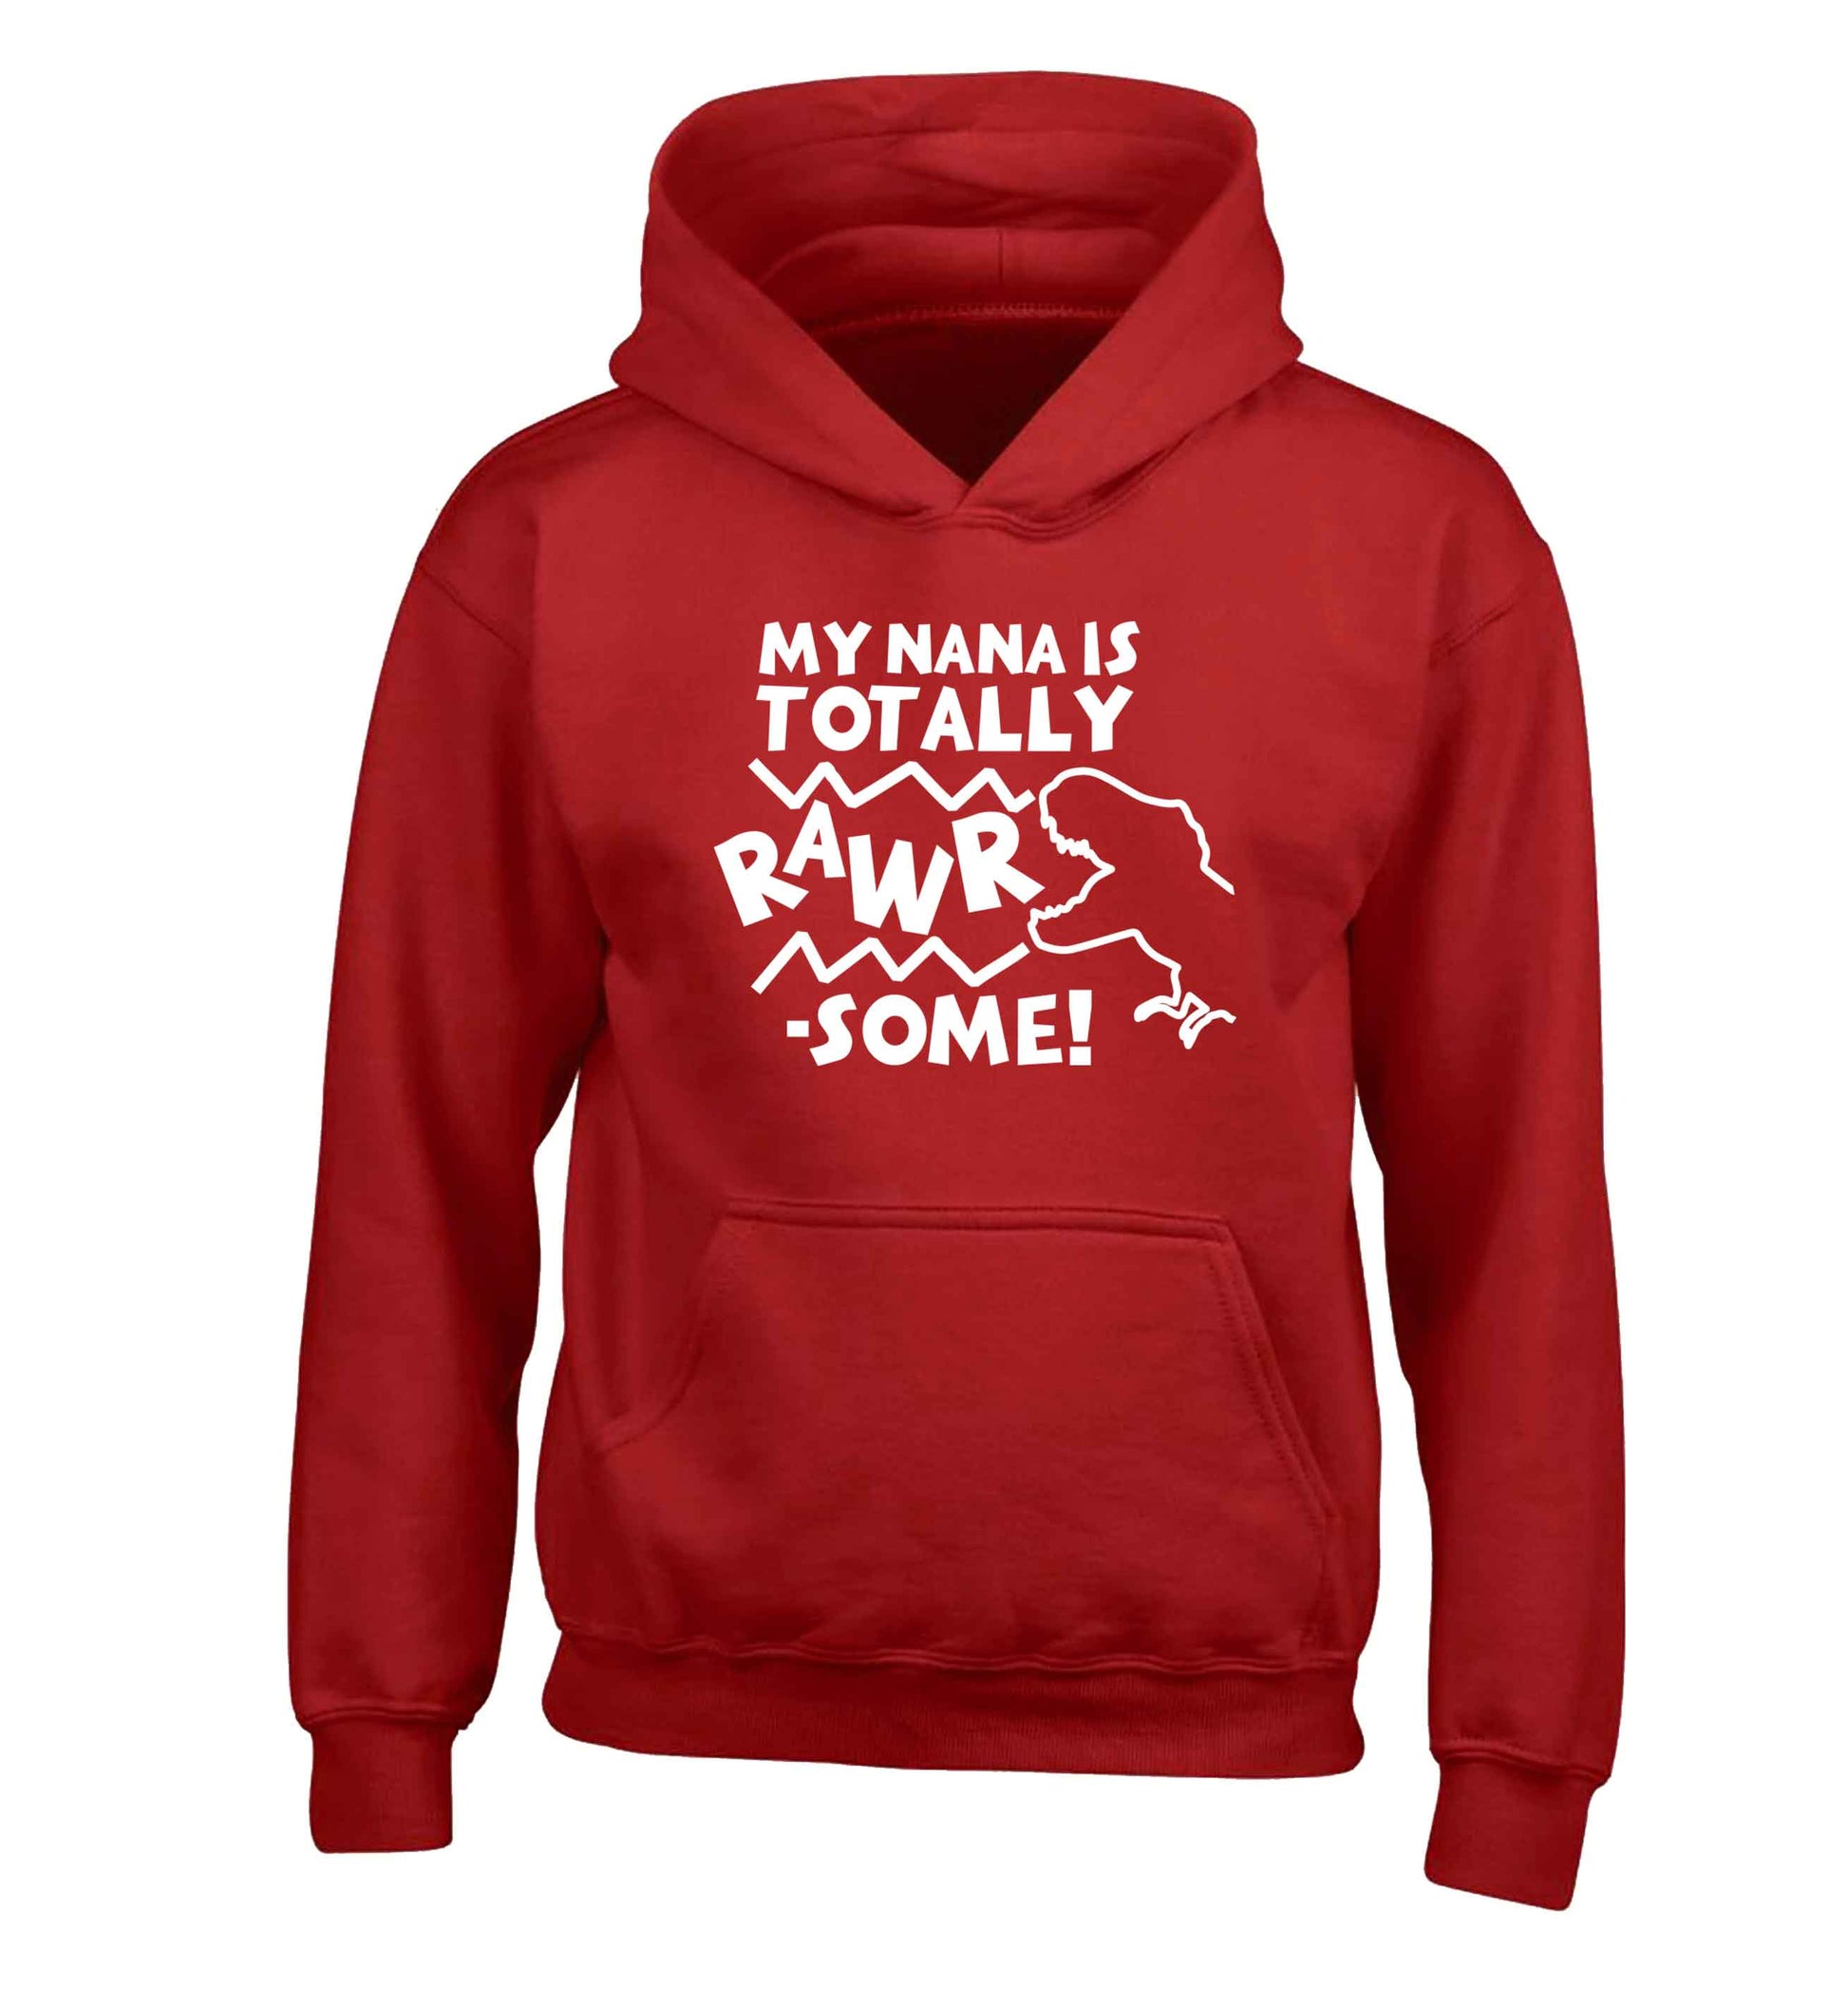 My nana is totally rawrsome children's red hoodie 12-13 Years